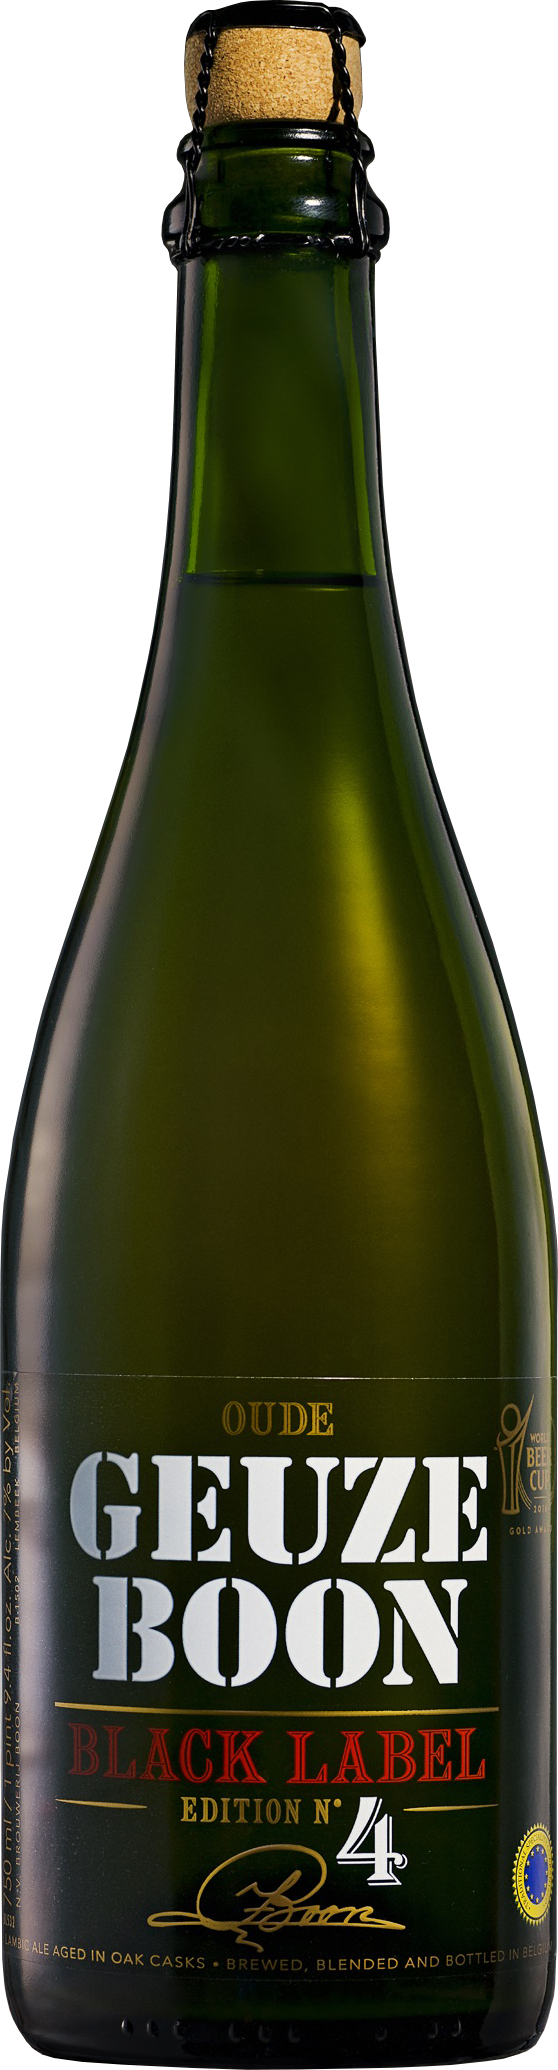 Boon Oude Geuze Black Label #4